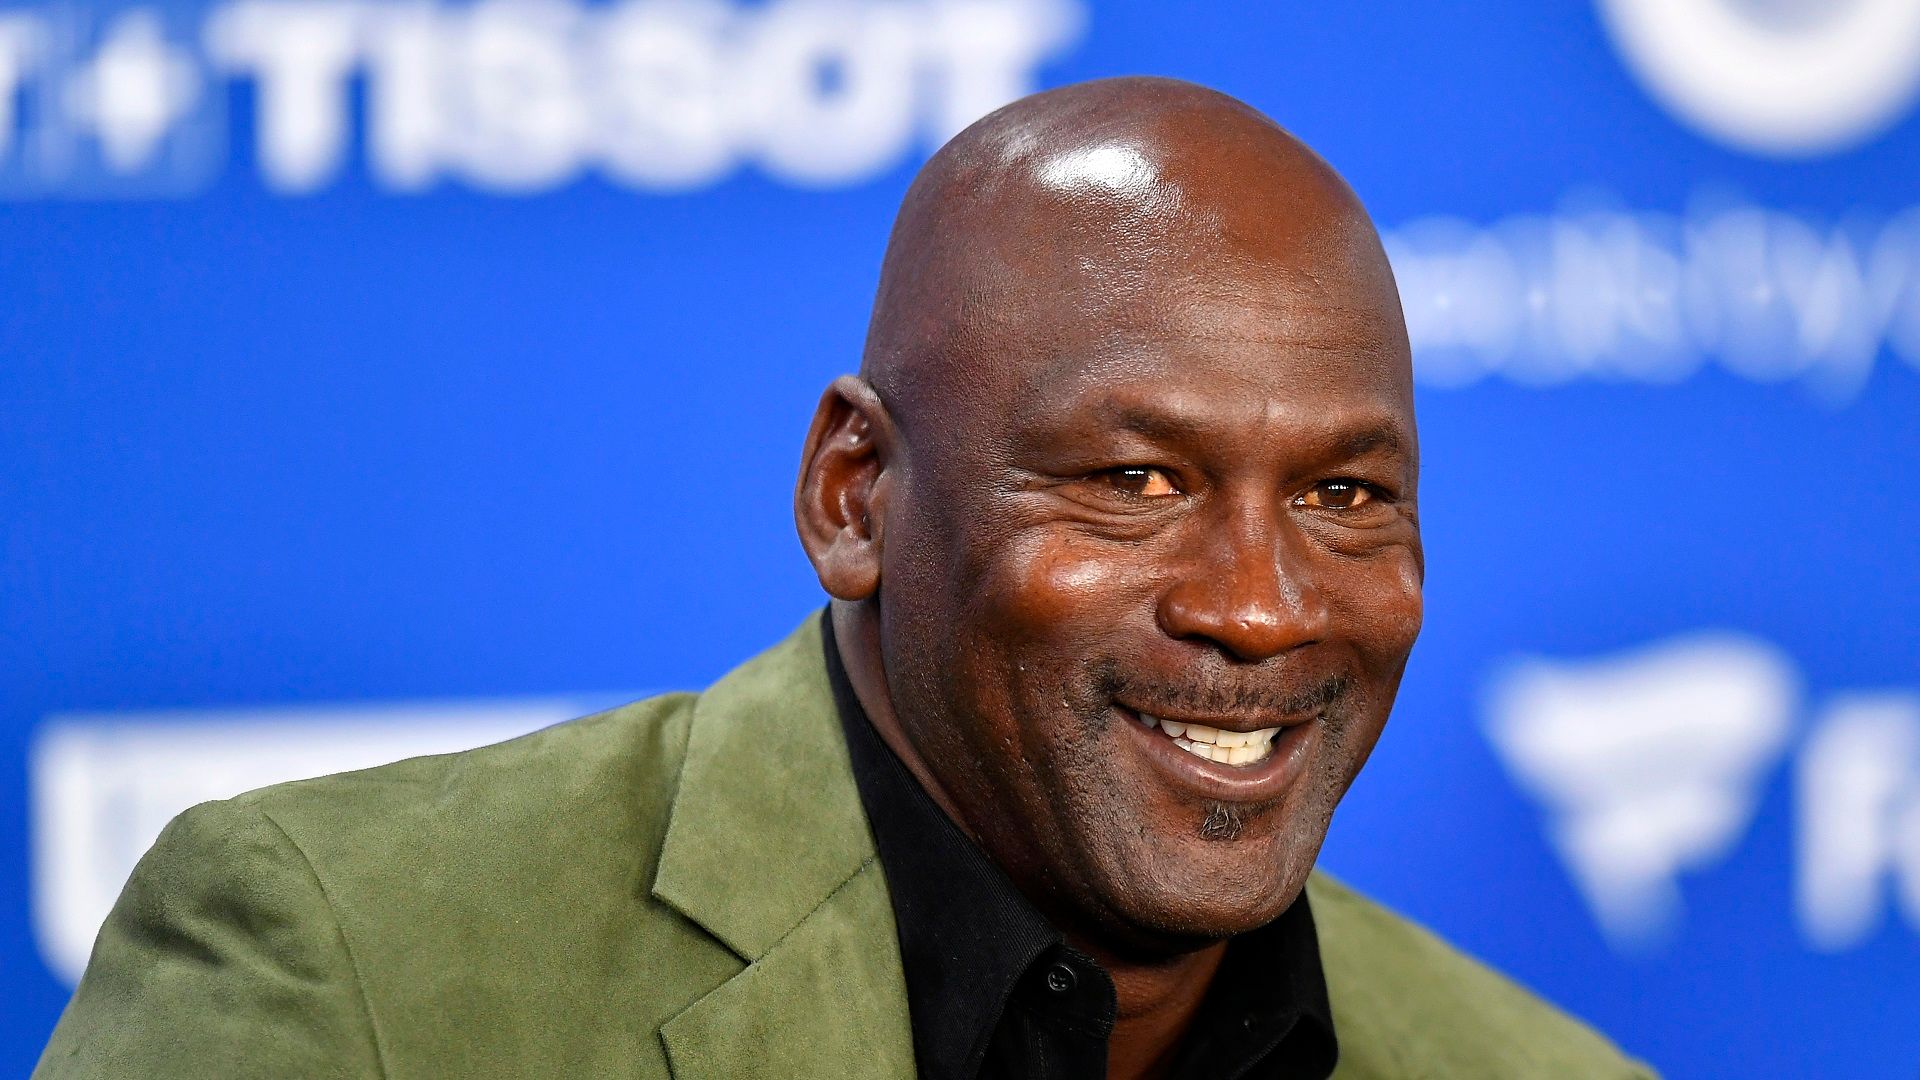 How Rich Is Michael Jordan? 9 Mind-Blowing Facts About His Net Worth